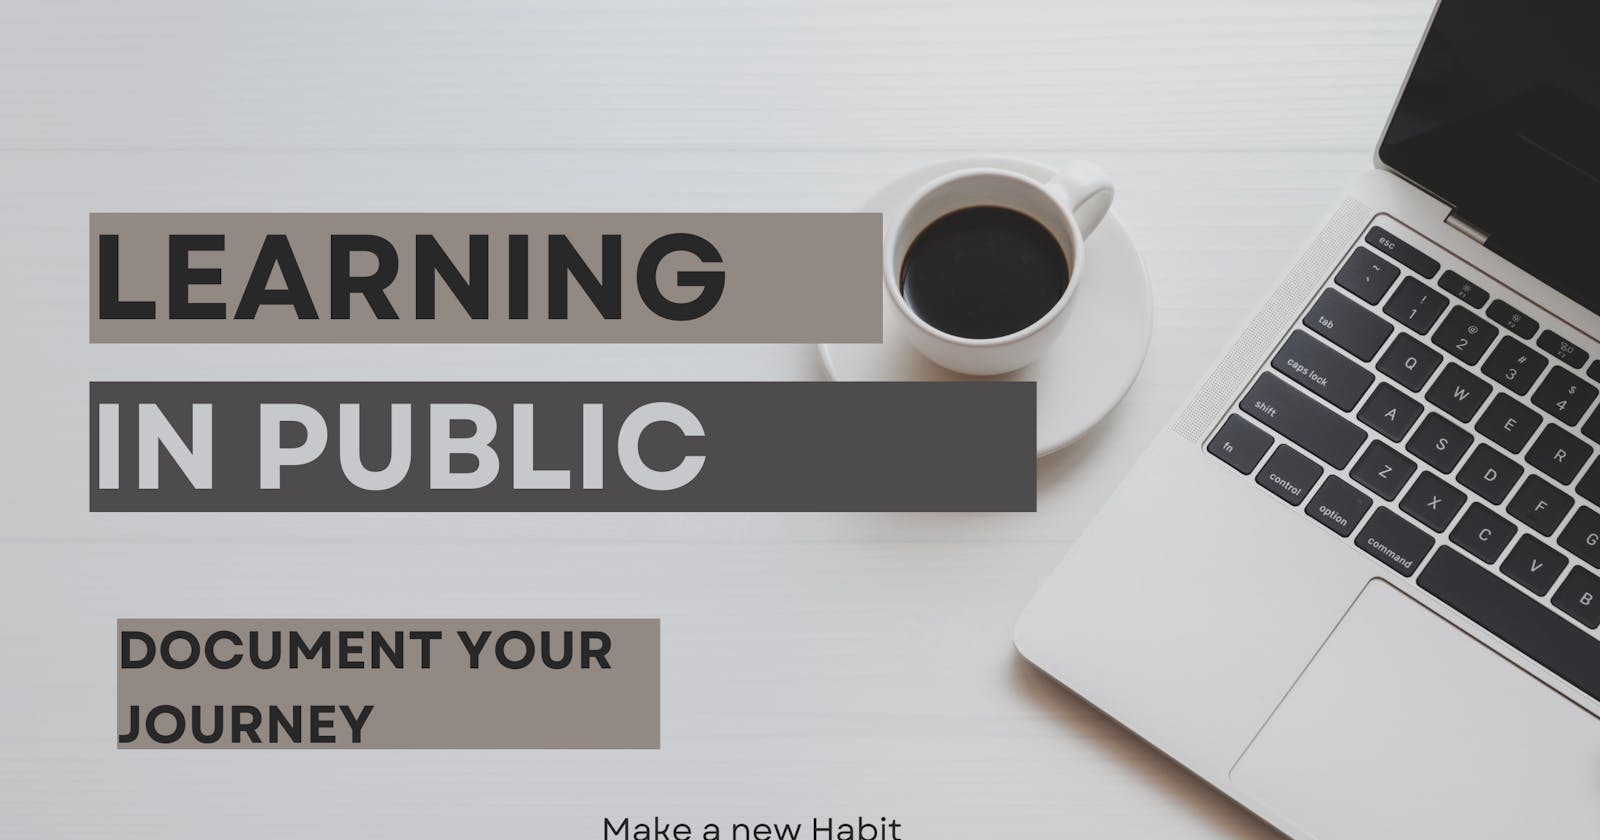 Accelerate your journey with a Good Habit of Learning in Public - My first Blog.